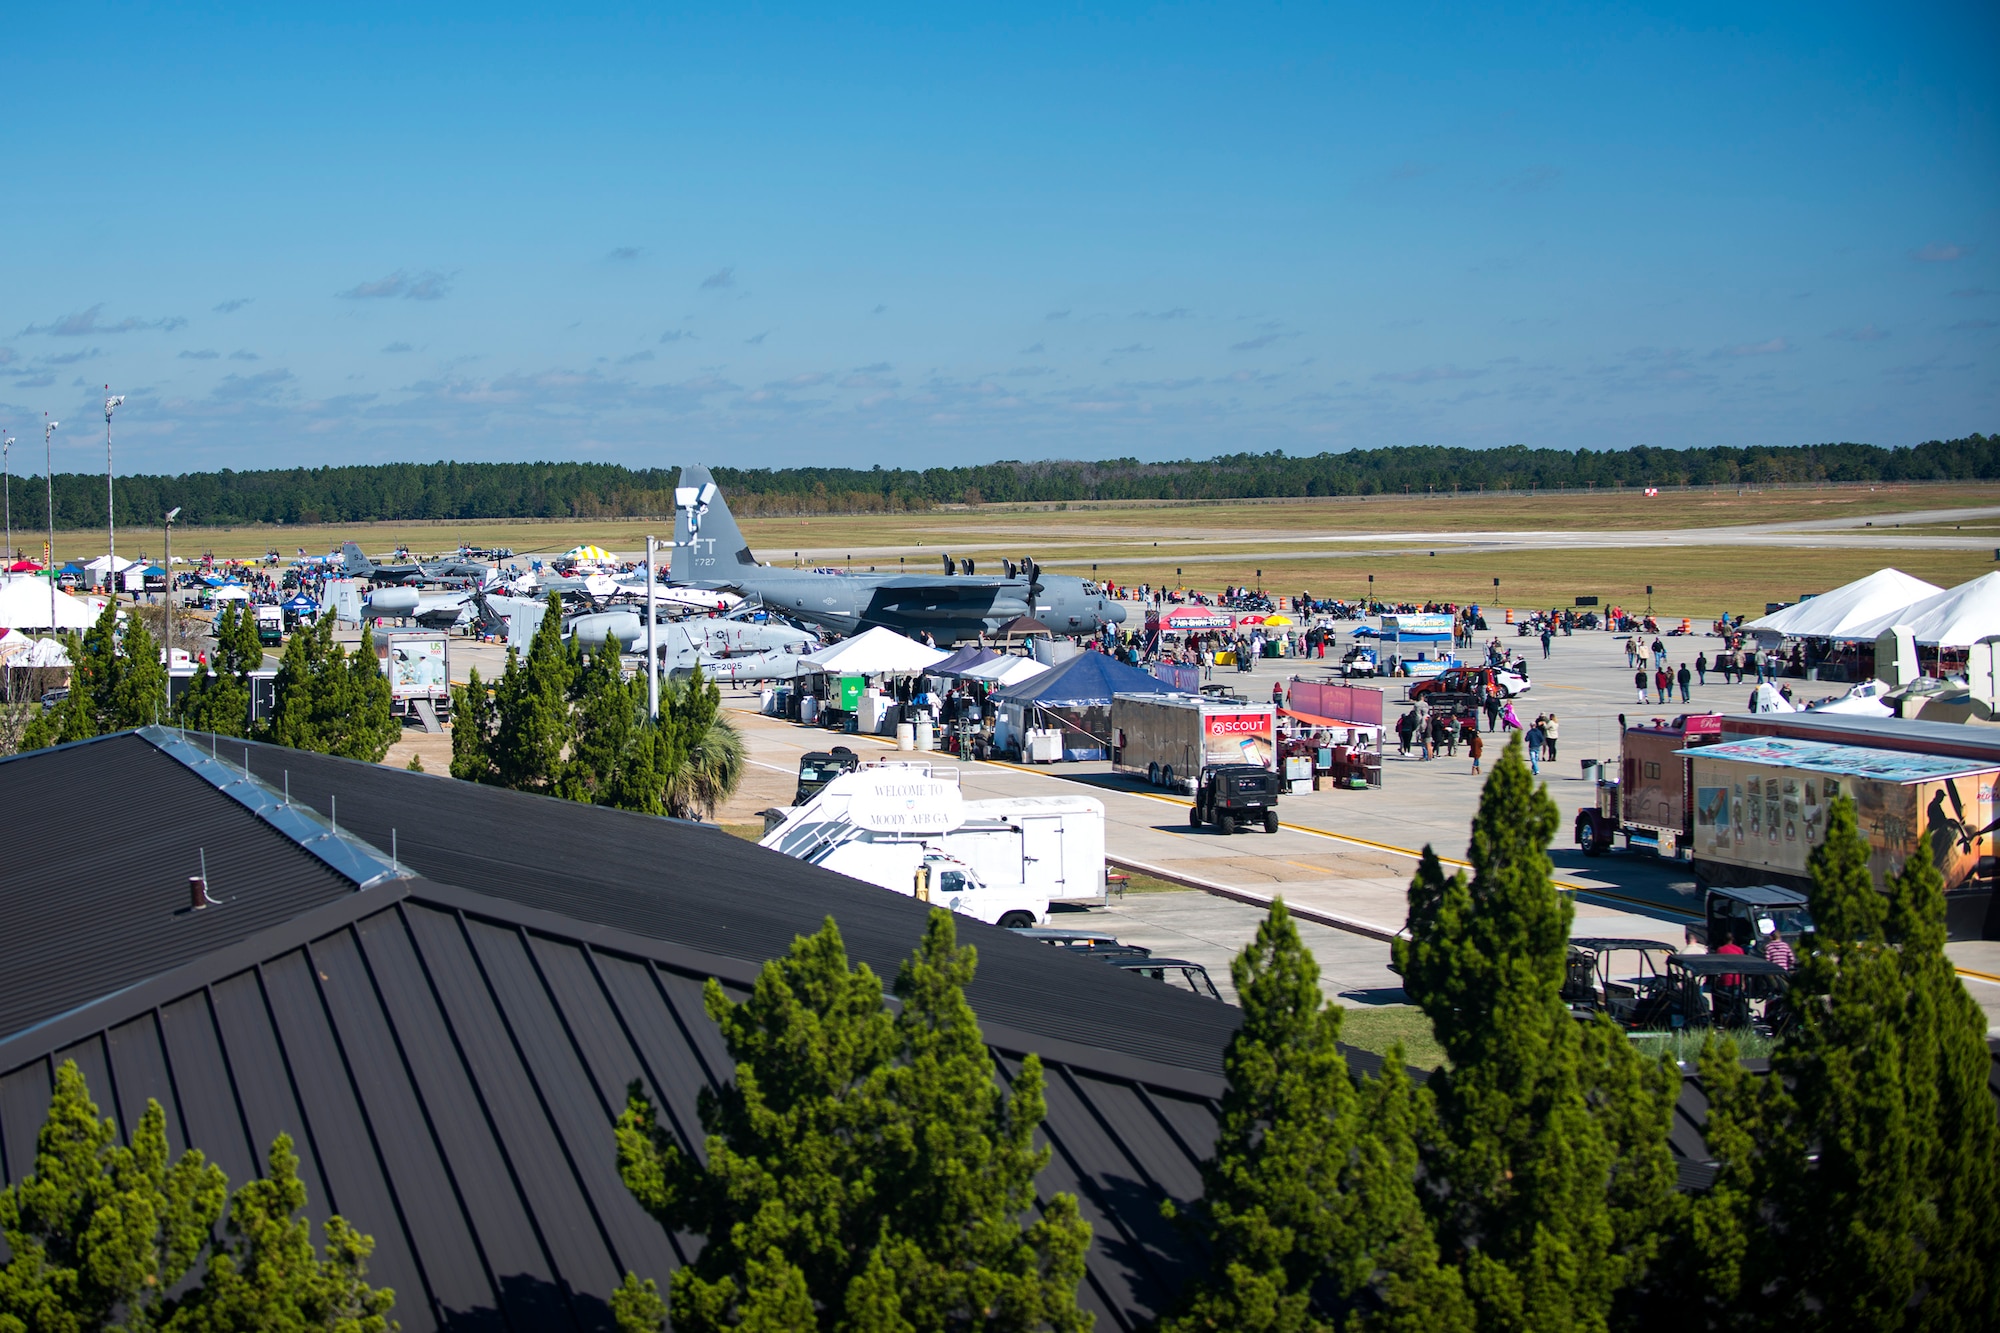 Spectators walk around and view the different attractions available the Thunder Over South Georgia Air Show, Oct. 29, 2017, at Moody Air Force Base, Ga. Throughout the show, guests viewed aircraft through the ages perform such as the P-51 mustang, a World War II fighter, and the Moody’s own A-10C Thunderbolt IIs. (U.S. Air Force photo by Airman 1st Class Erick Requadt)